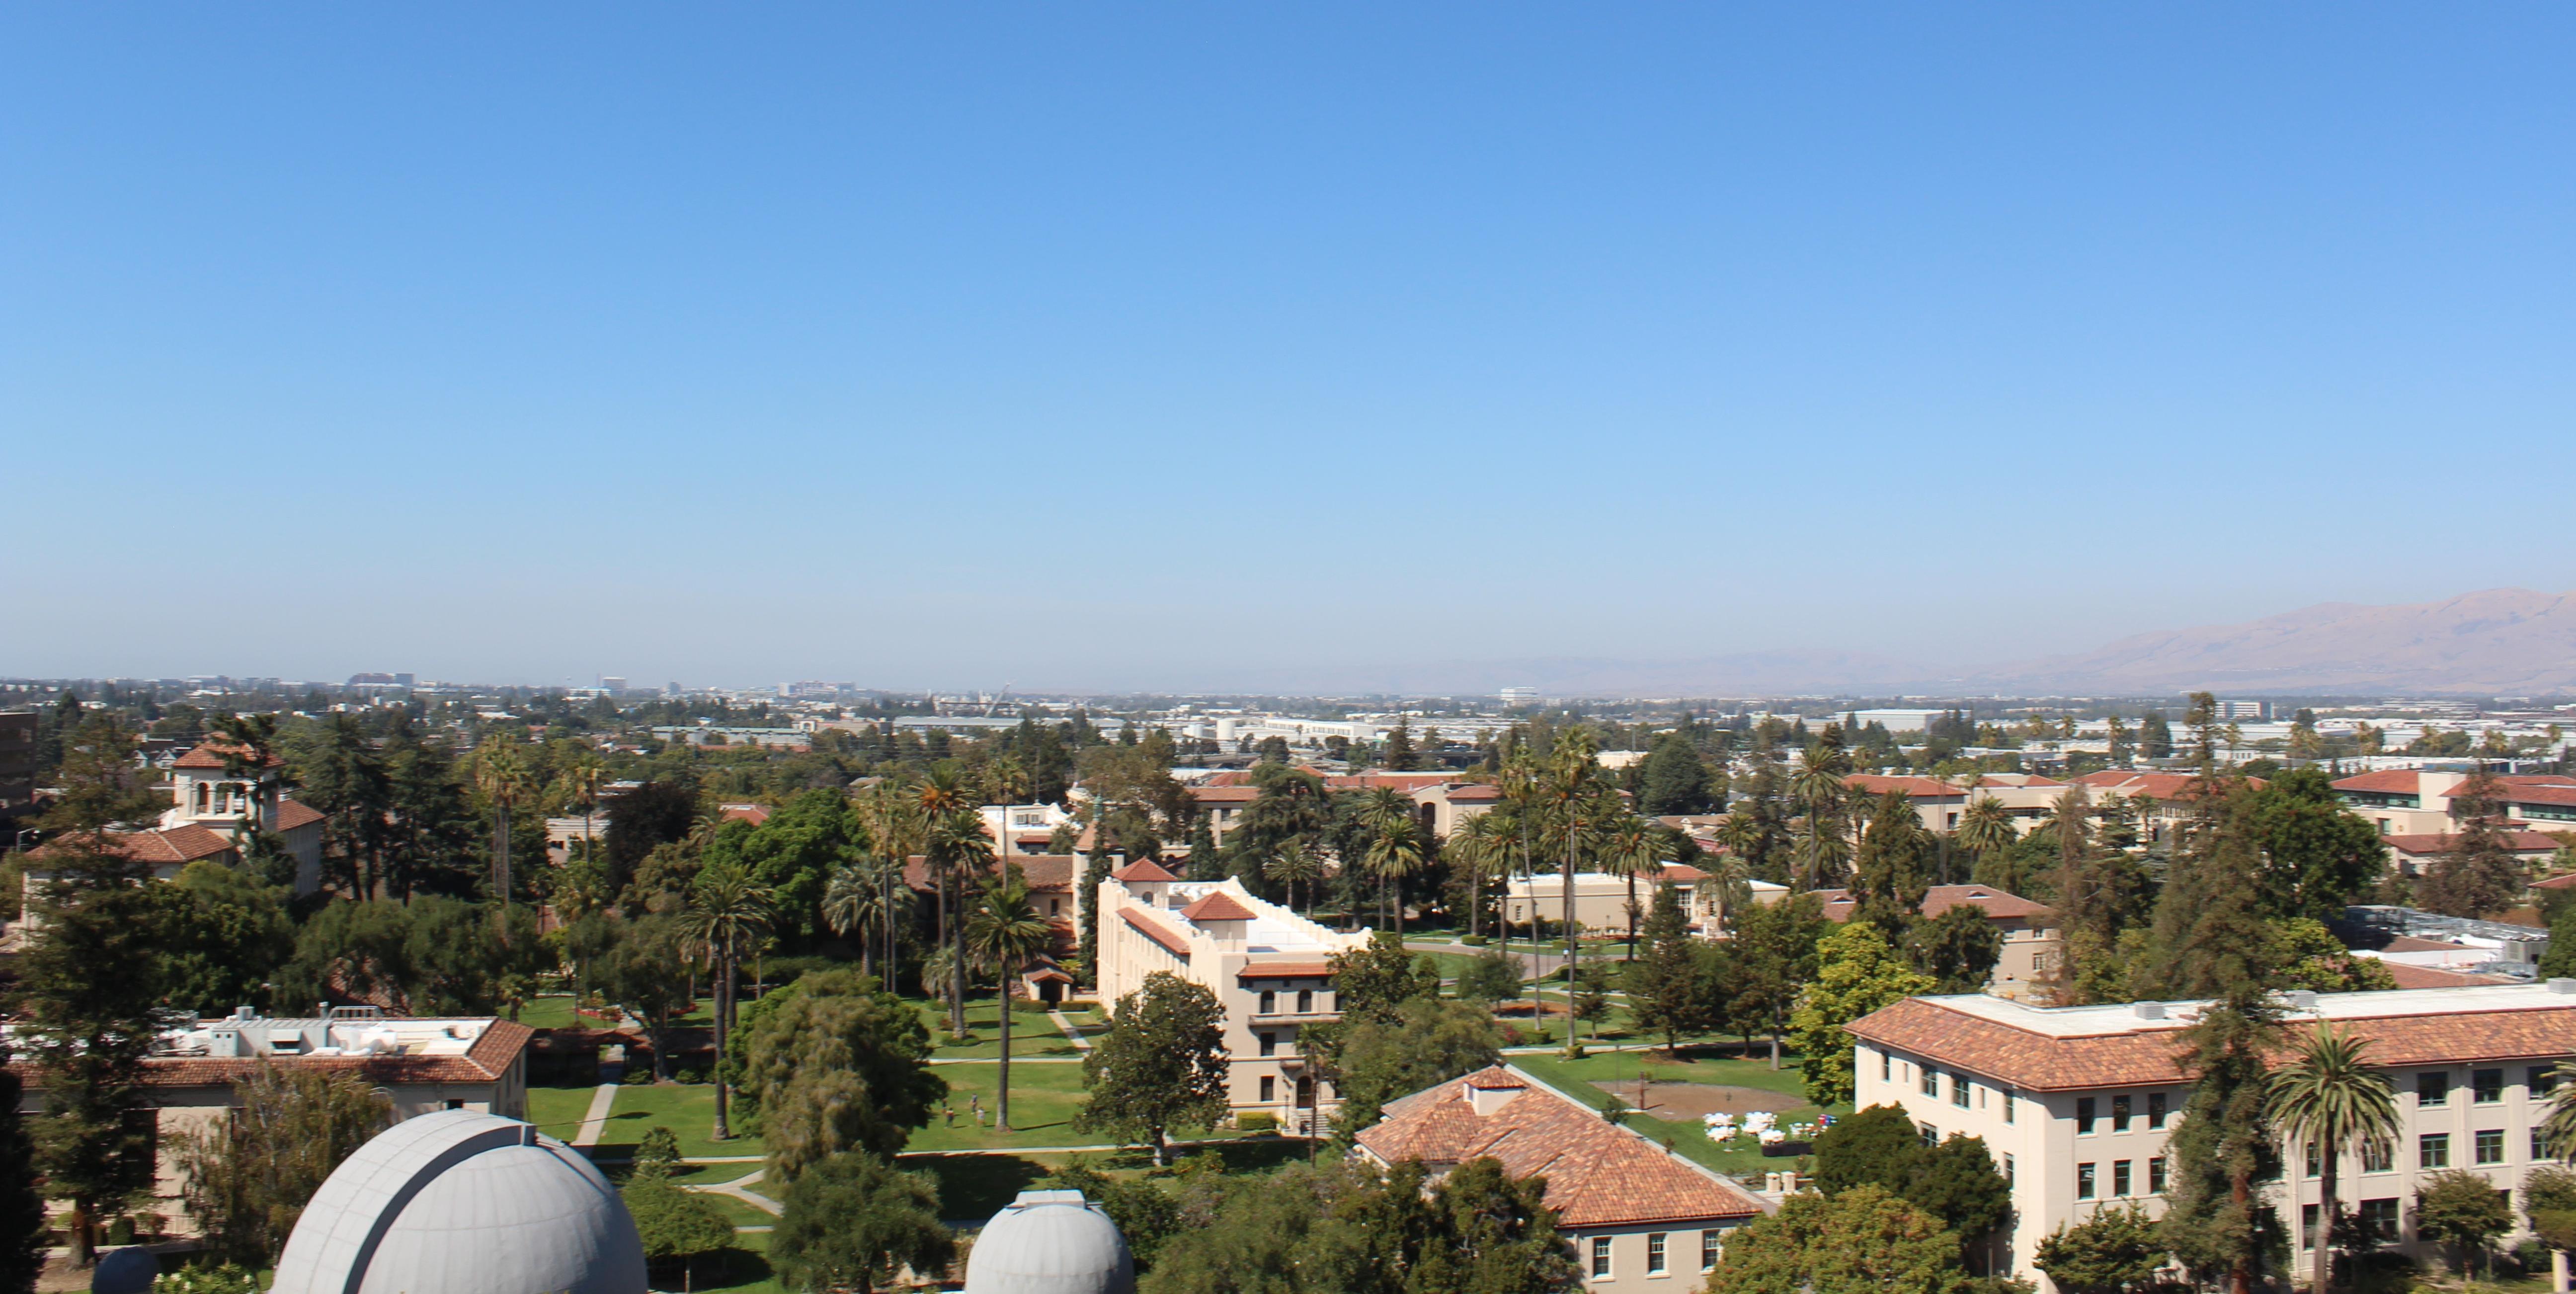 An overhead view of Santa Clara University's campus with the city of Santa Clara in the distance.